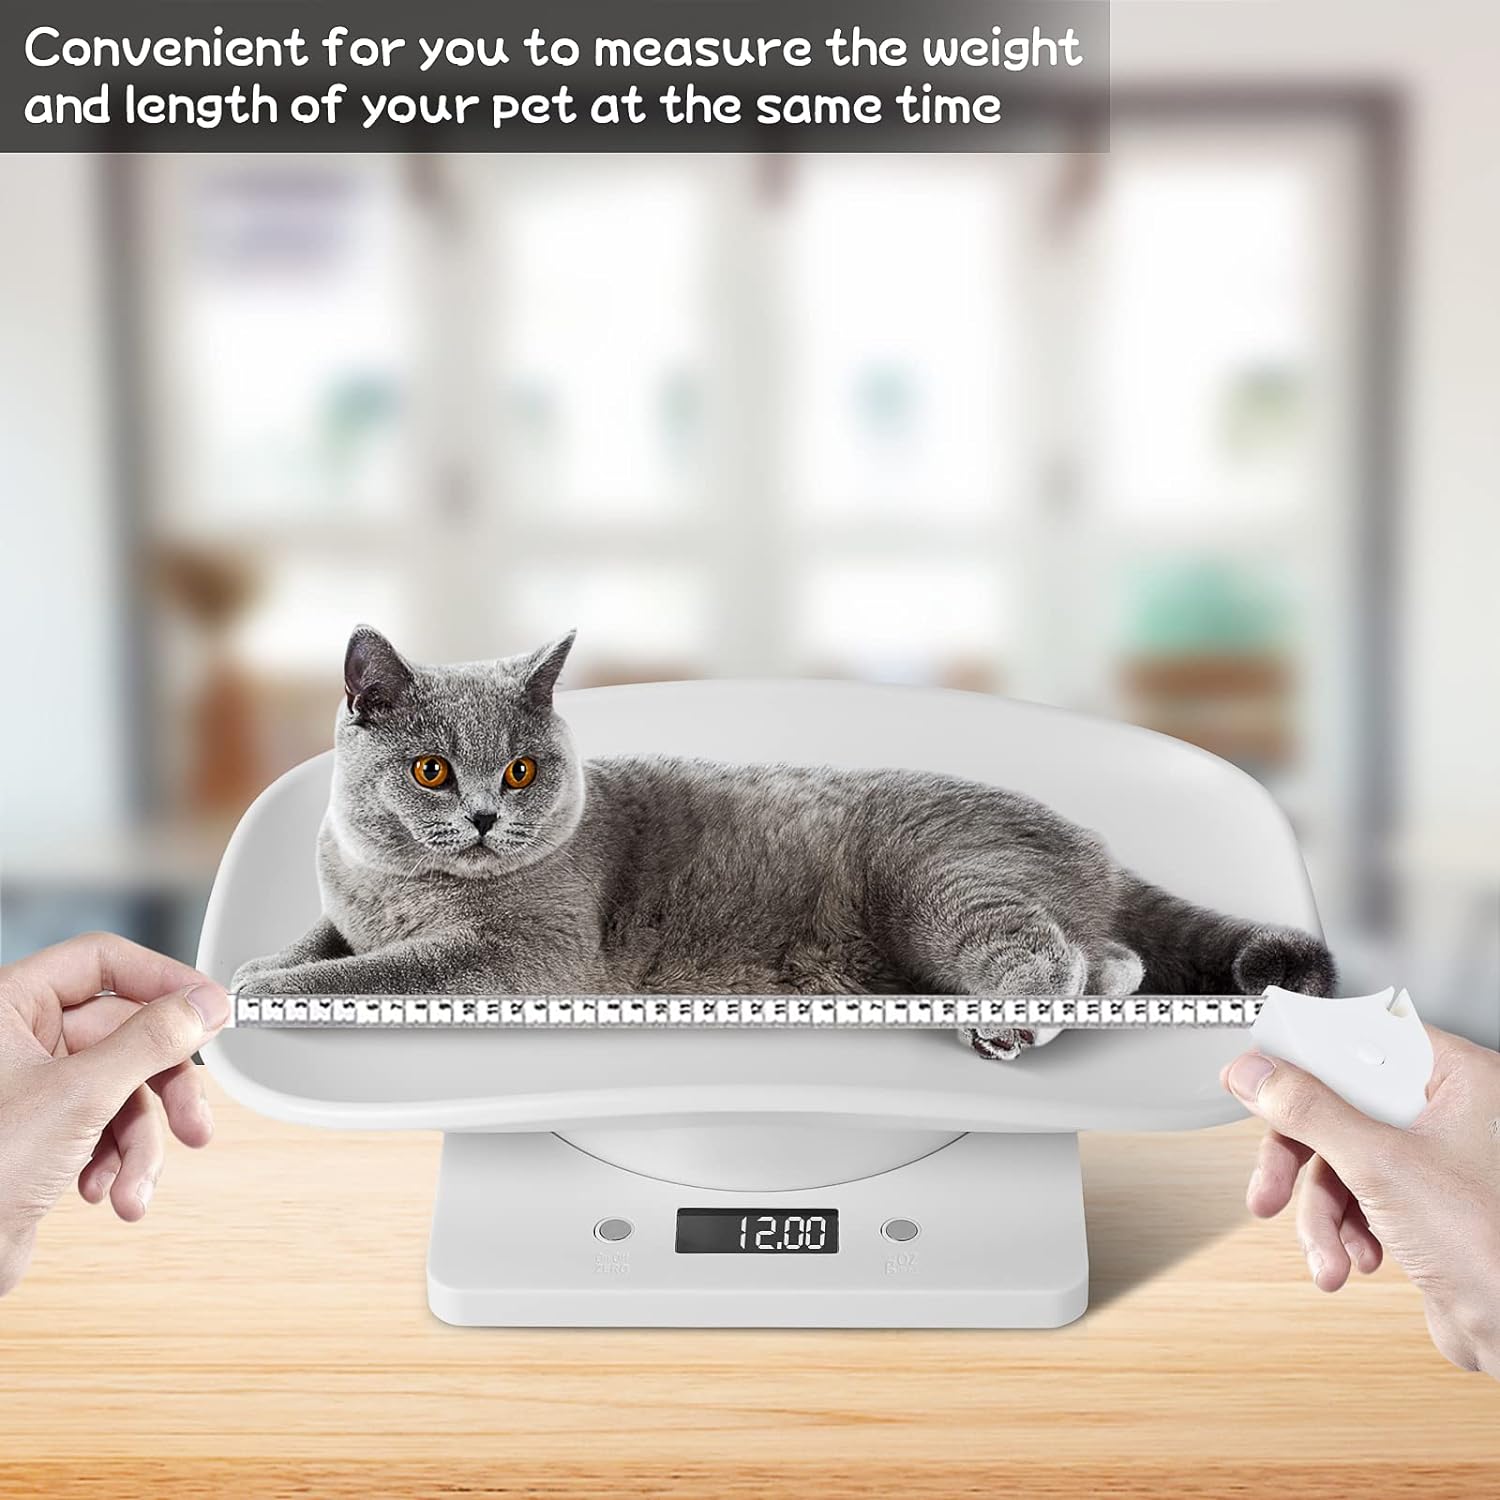 Baby Scale for Pet, Pet Scale Digital, Puppy Scales for Weighing, Puppy Whelping Scale, Dog Cat Scale, Portable Newborn Pet Scale for Small Animals, Baby Puppies Kittens Weight Scale (33lb+Tape) : Baby